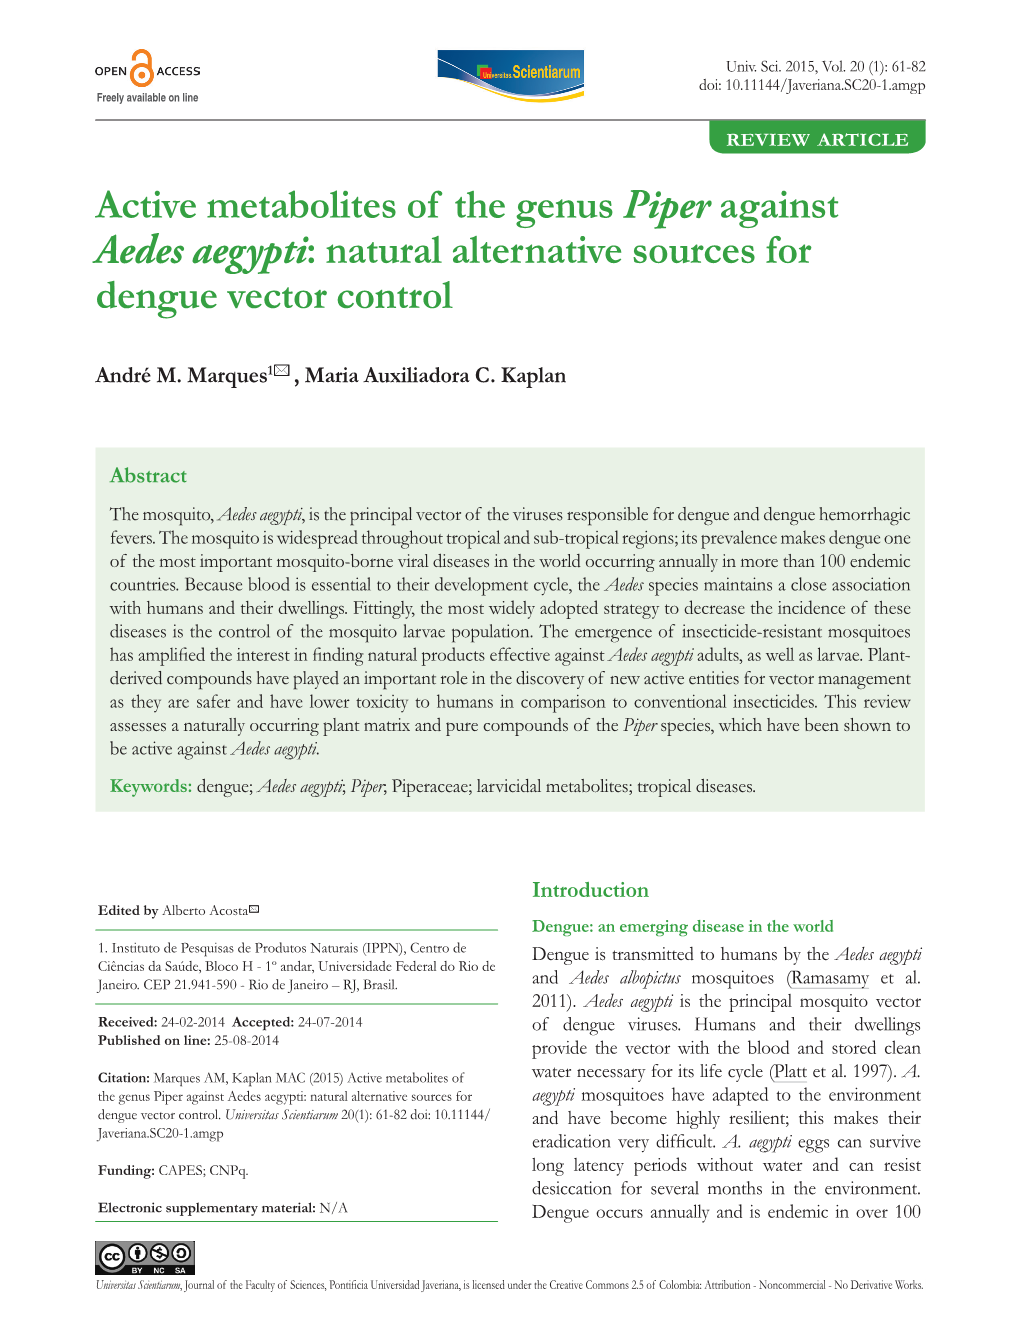 Active Metabolites of the Genus Piper Against Aedes Aegypti: Natural Alternative Sources for Dengue Vector Control